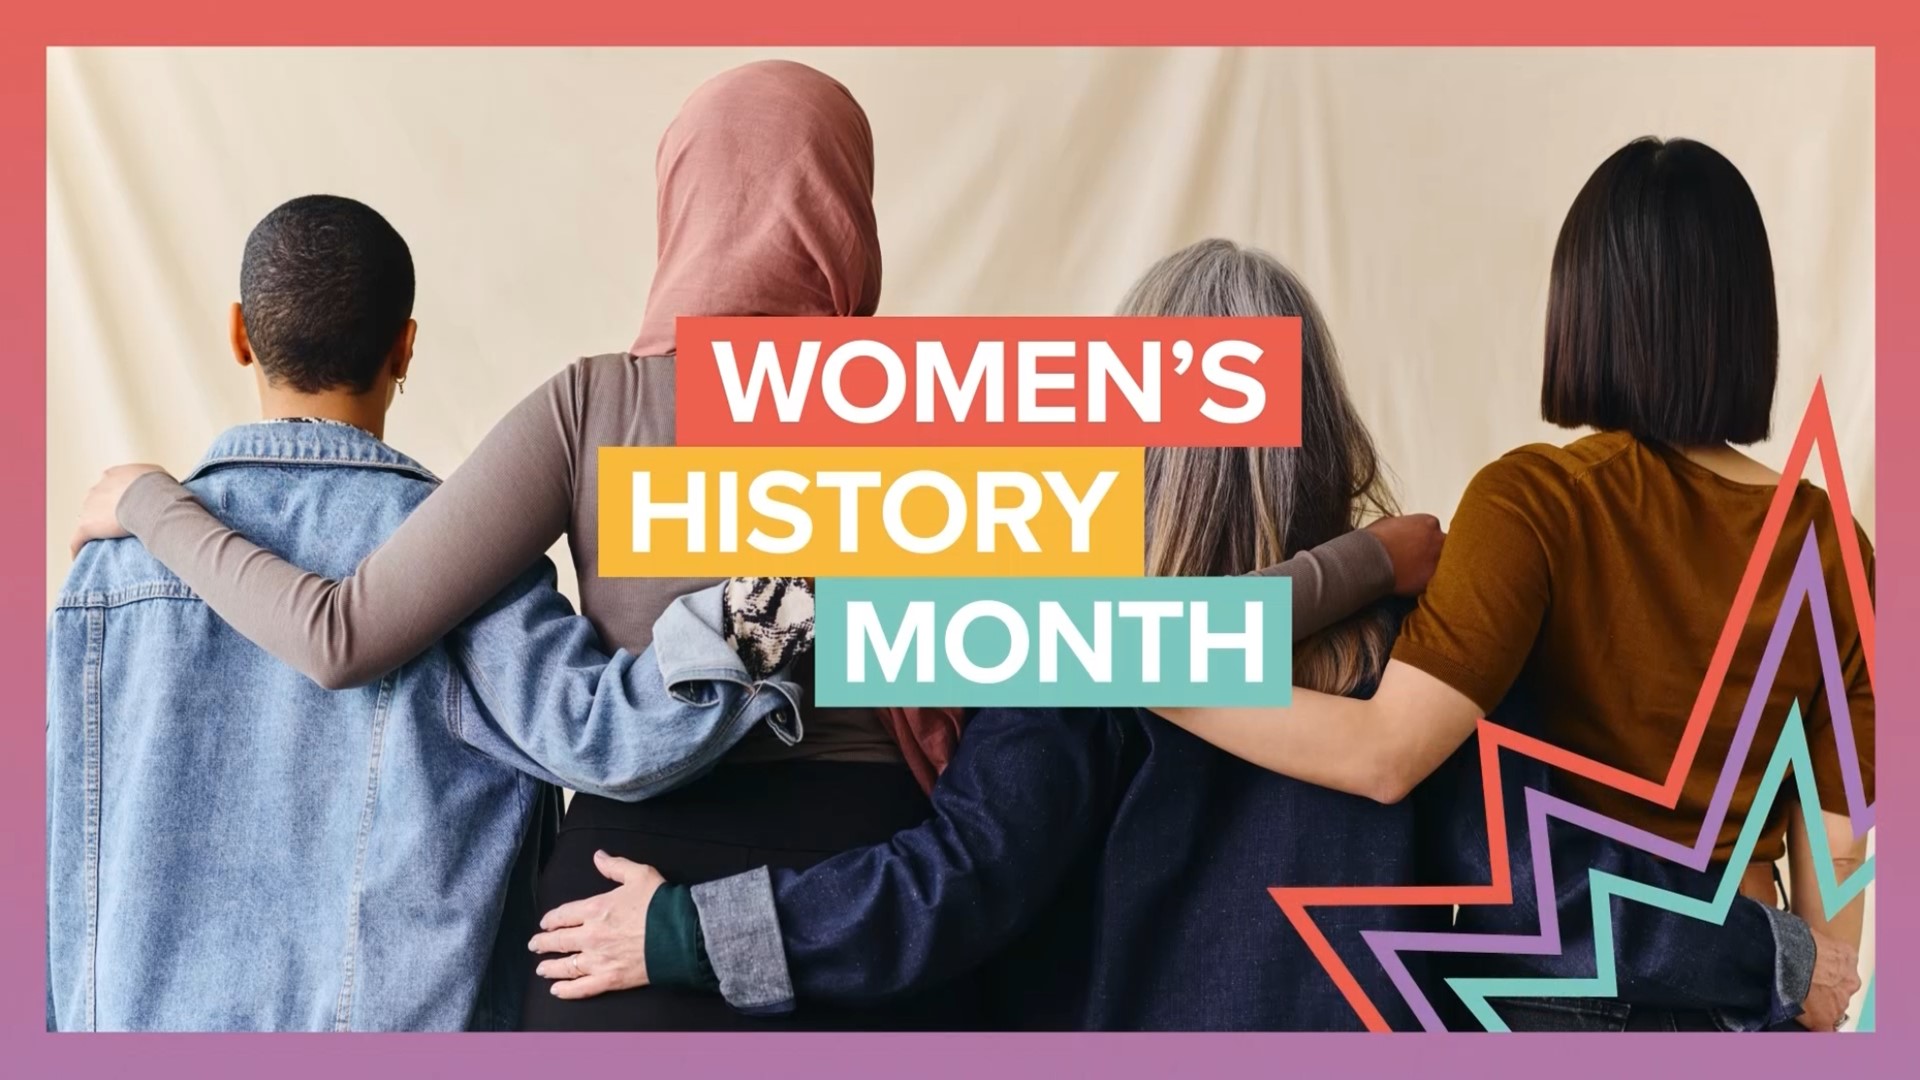 Join us in celebrating women who have contributed to our history, culture, and everyday rights as women.